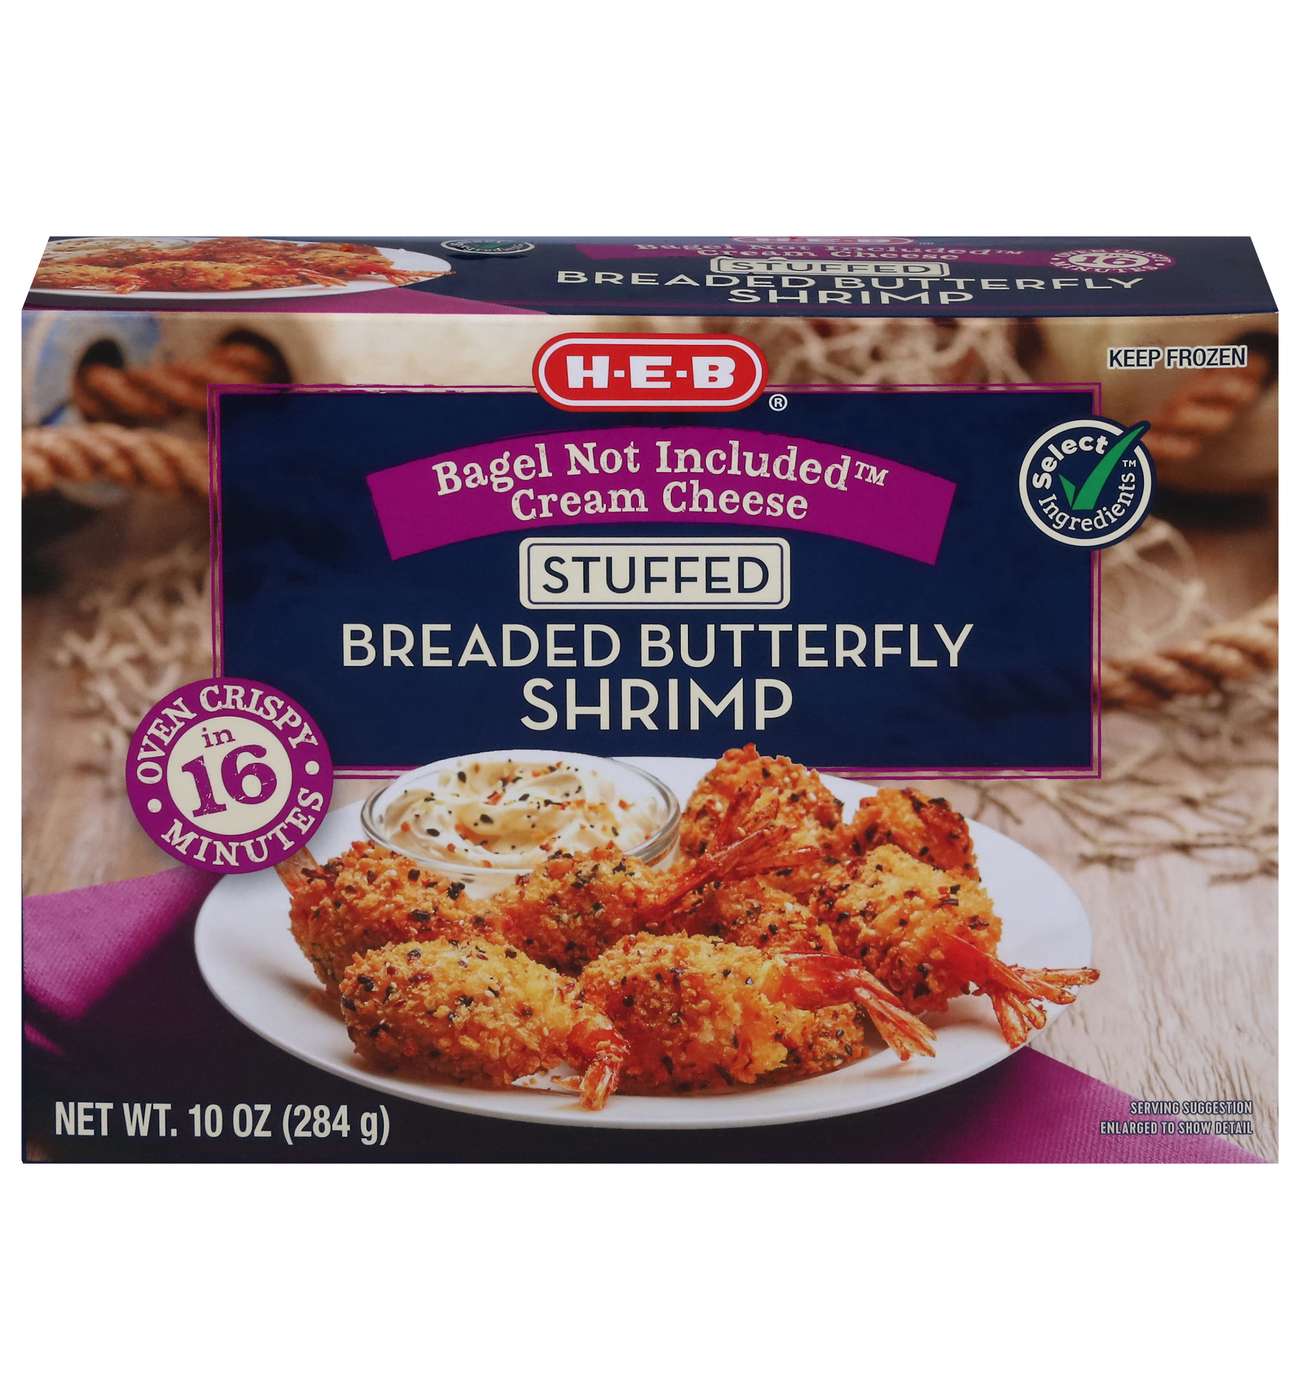 H-E-B Frozen Bagel Not Included Cream Cheese-Stuffed Breaded Butterfly Shrimp; image 1 of 2